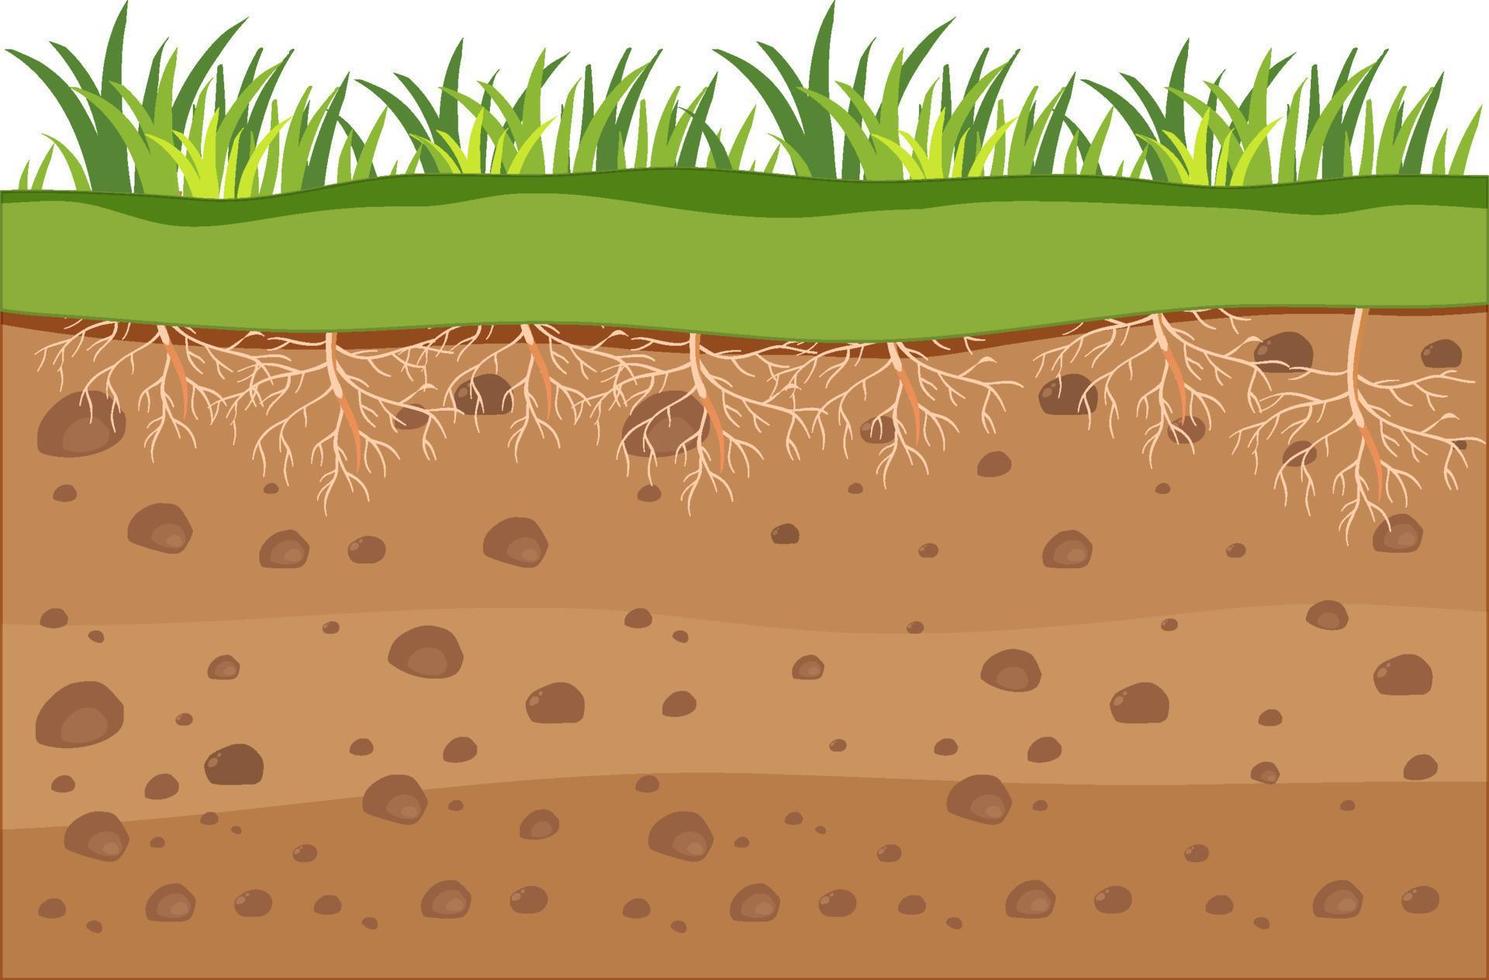 Scientific education of grass and its root vector